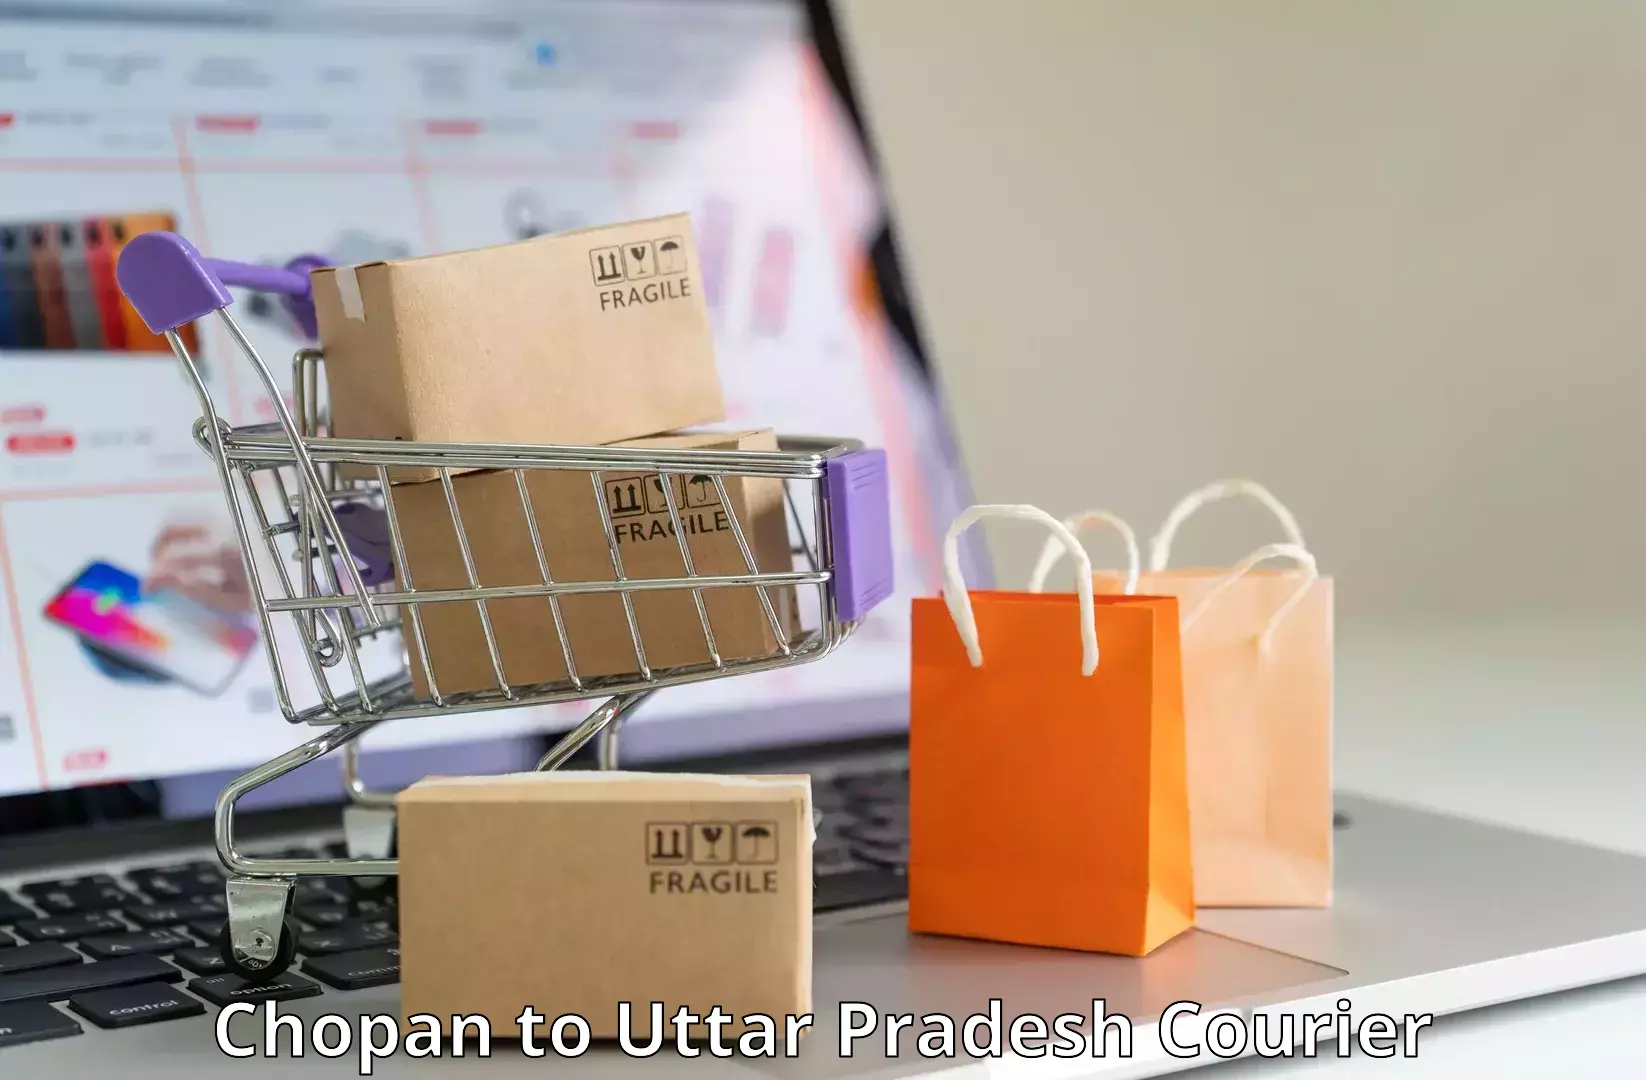 End-to-end delivery Chopan to Uttar Pradesh